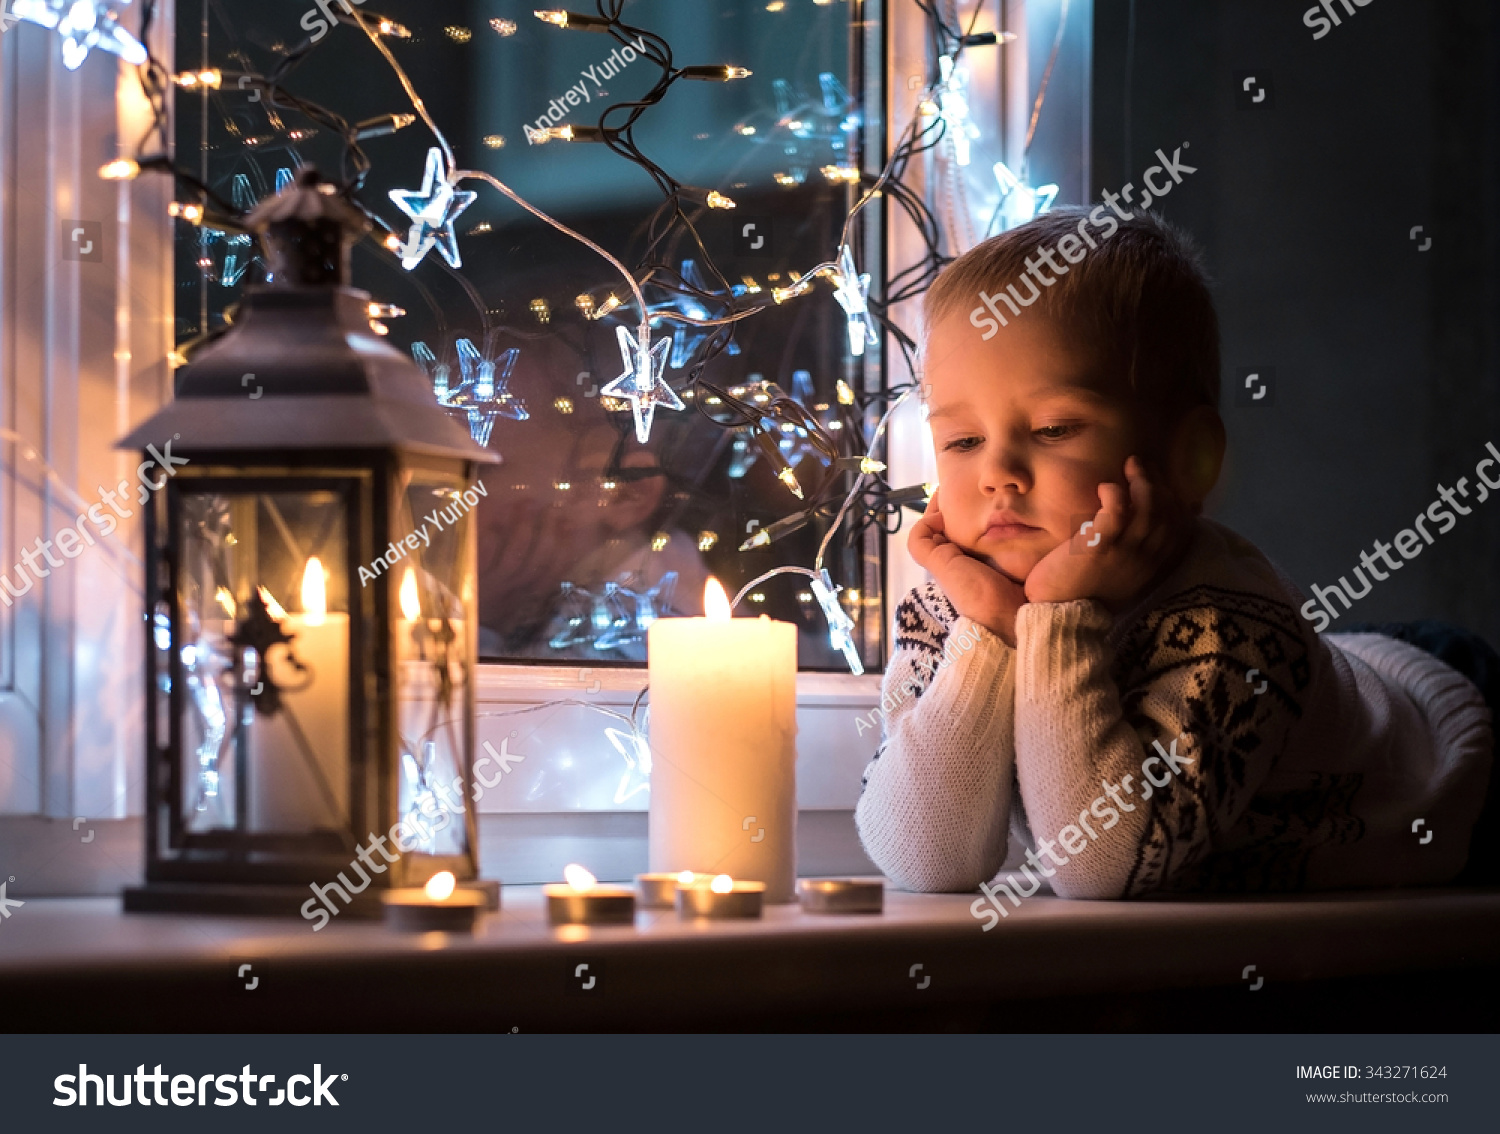 Child at Christmas eve and New Year #343271624